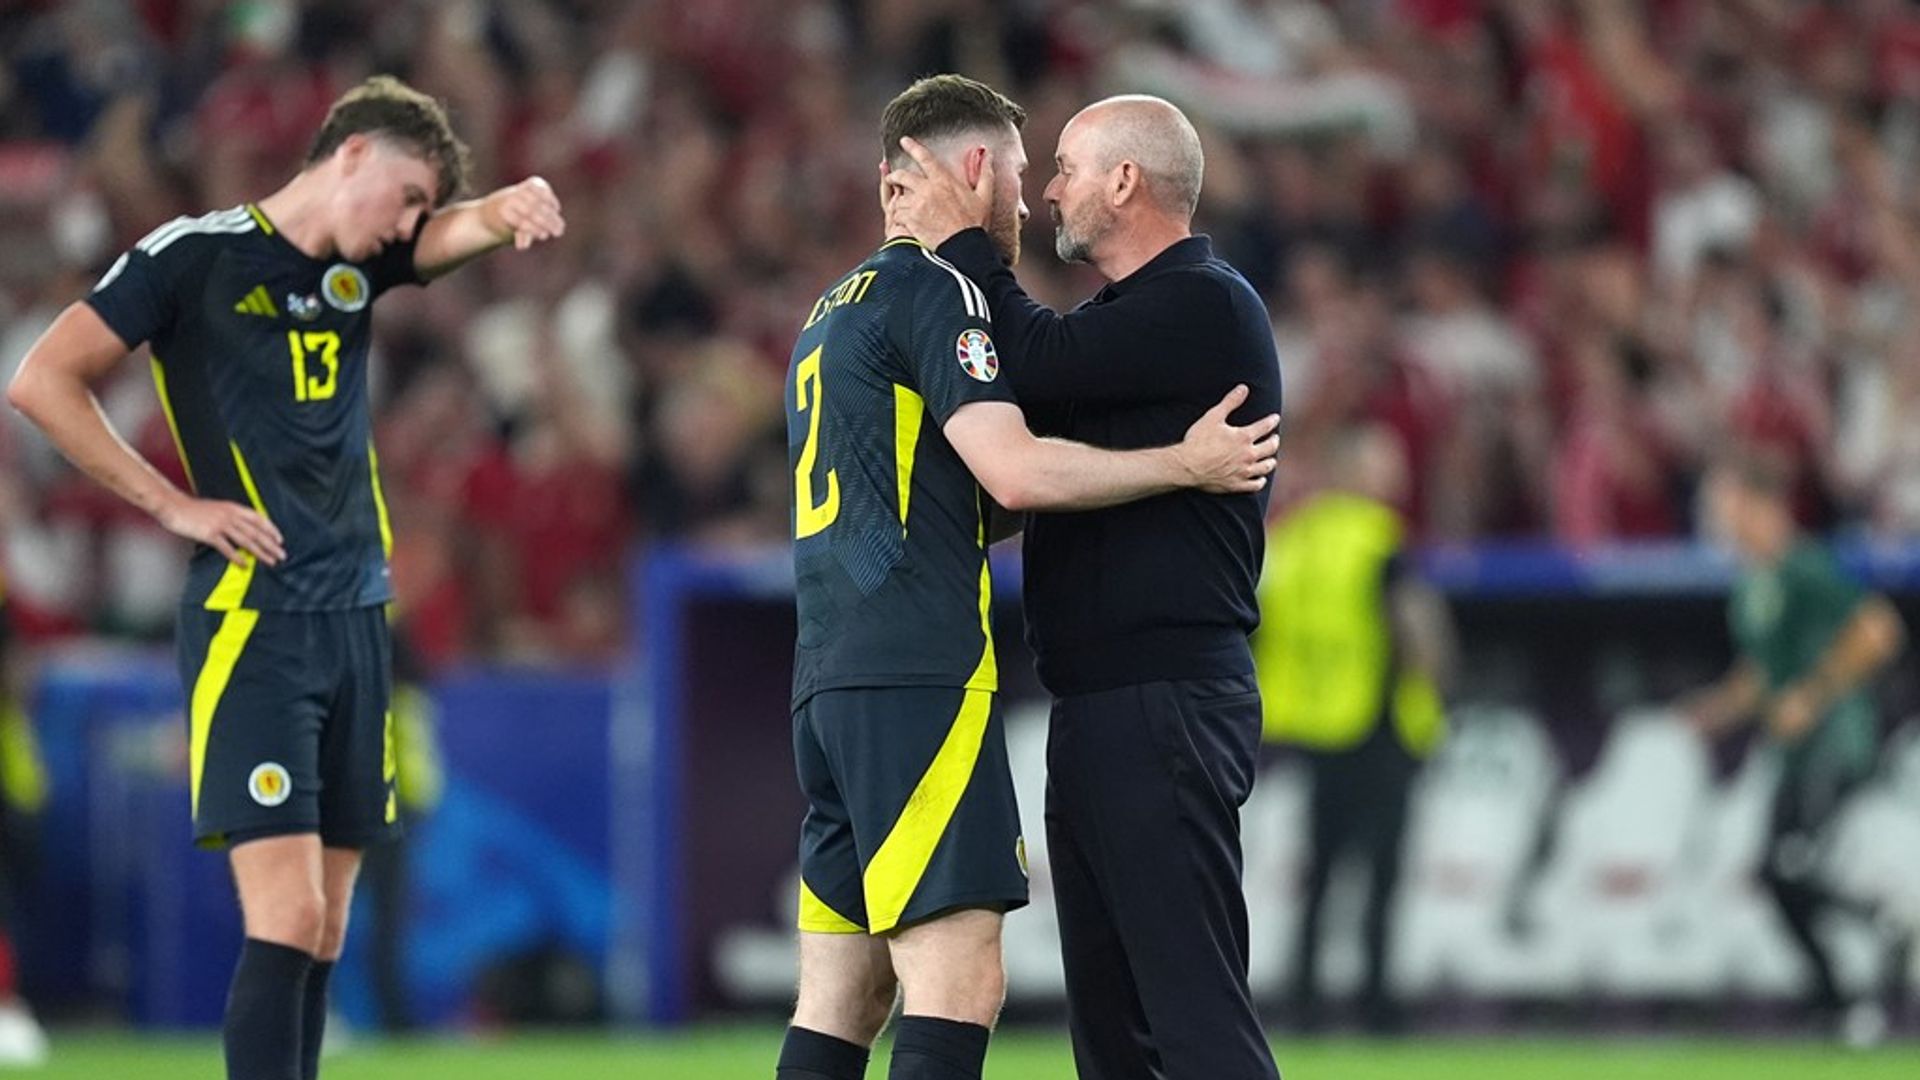 Agony for Scotland as Euro journey ended by late Hungary winner